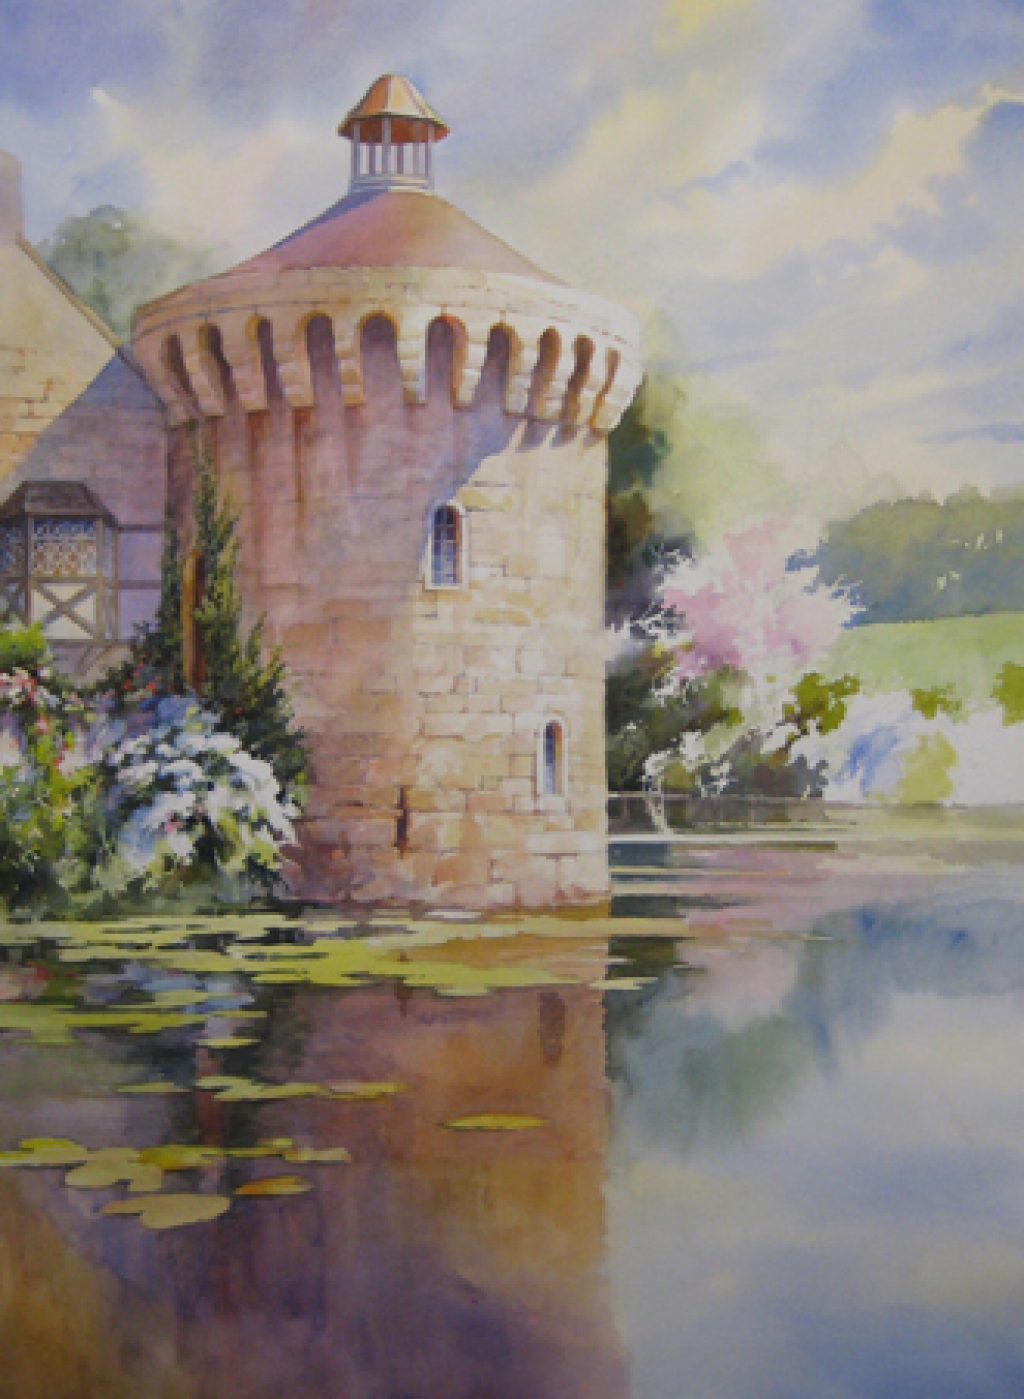 Watercolor painting of Scotney Tower in England by Roland Lee